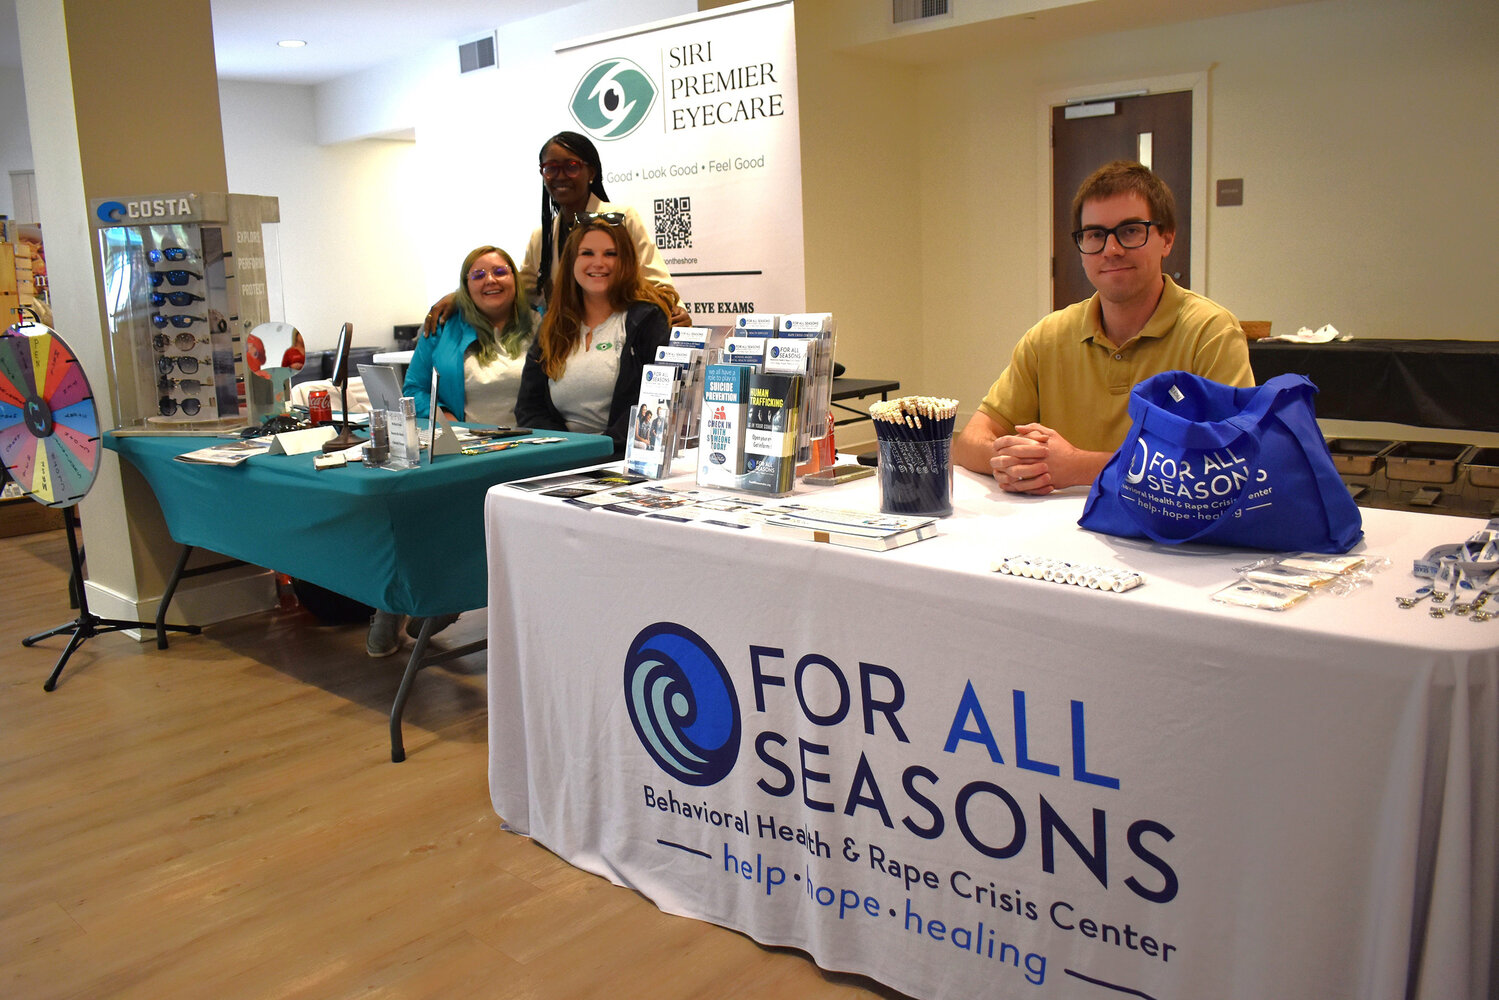 Siri Premier Eyecare and For All Seasons were neighbors at Thrive Dorchester 2023, hosted by the Dorchester Banner at the Weinberg Intergenerational Center.